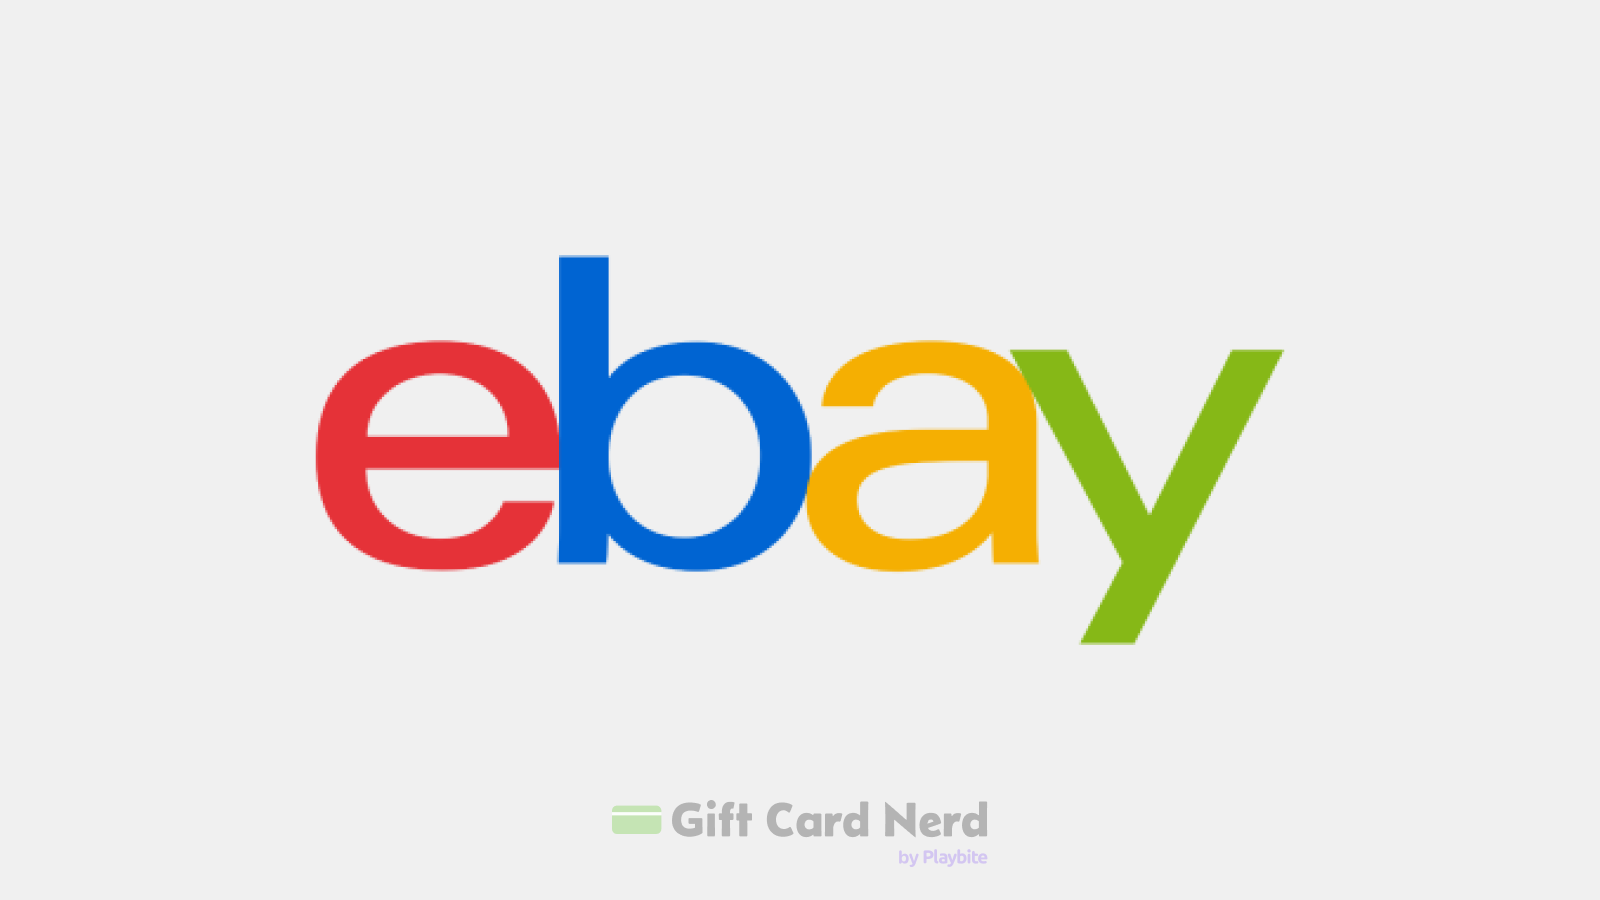 Can I Use an eBay Gift Card on Cash App?